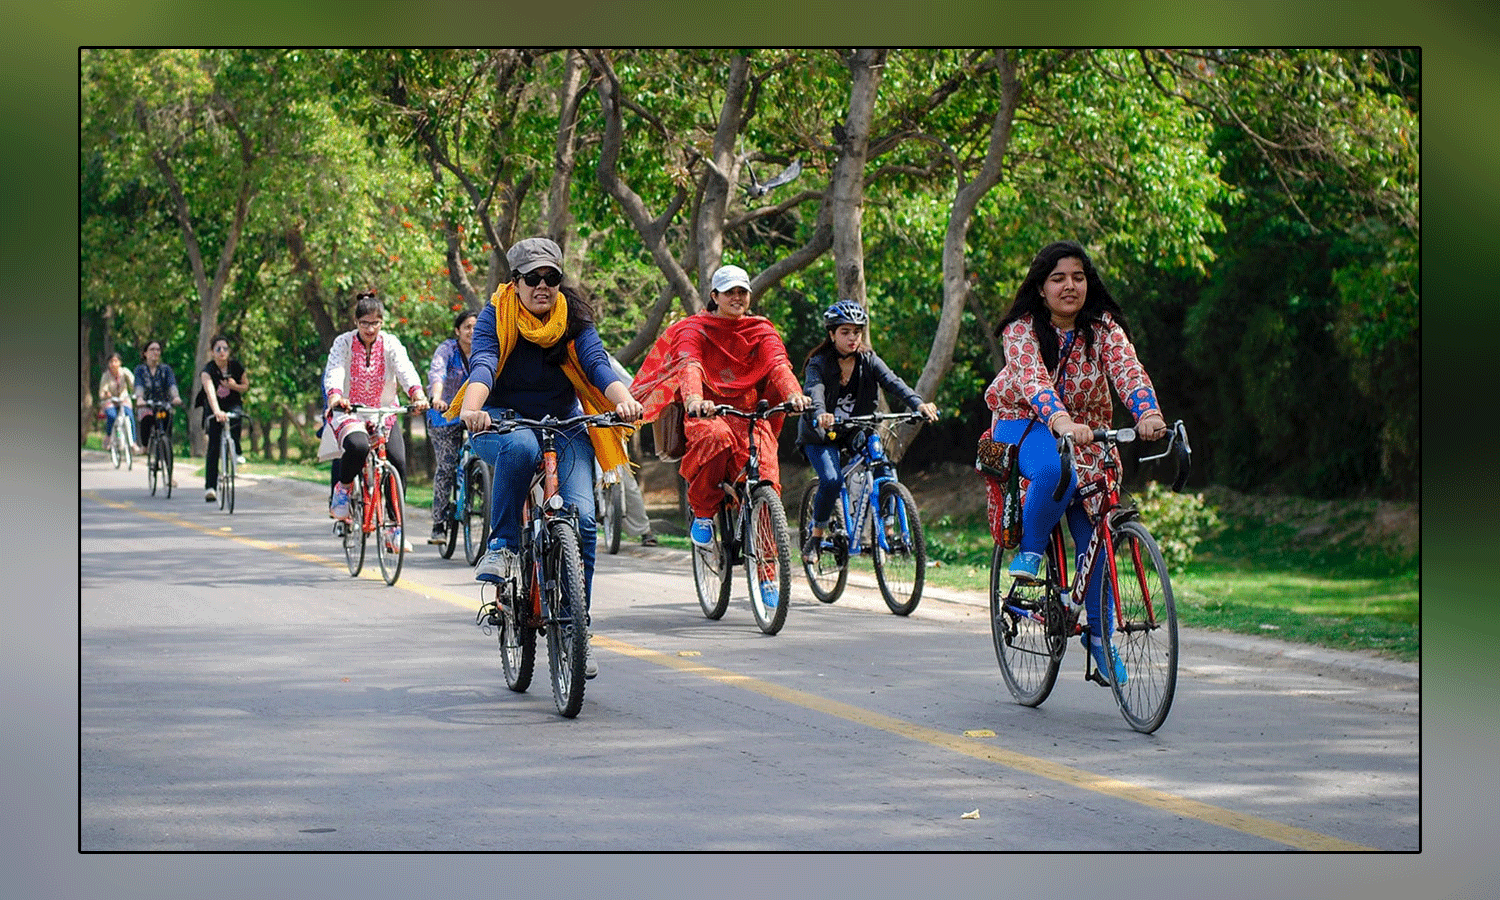 Exciting cycling competitions in Lahore, participation of a large number of children, women and men